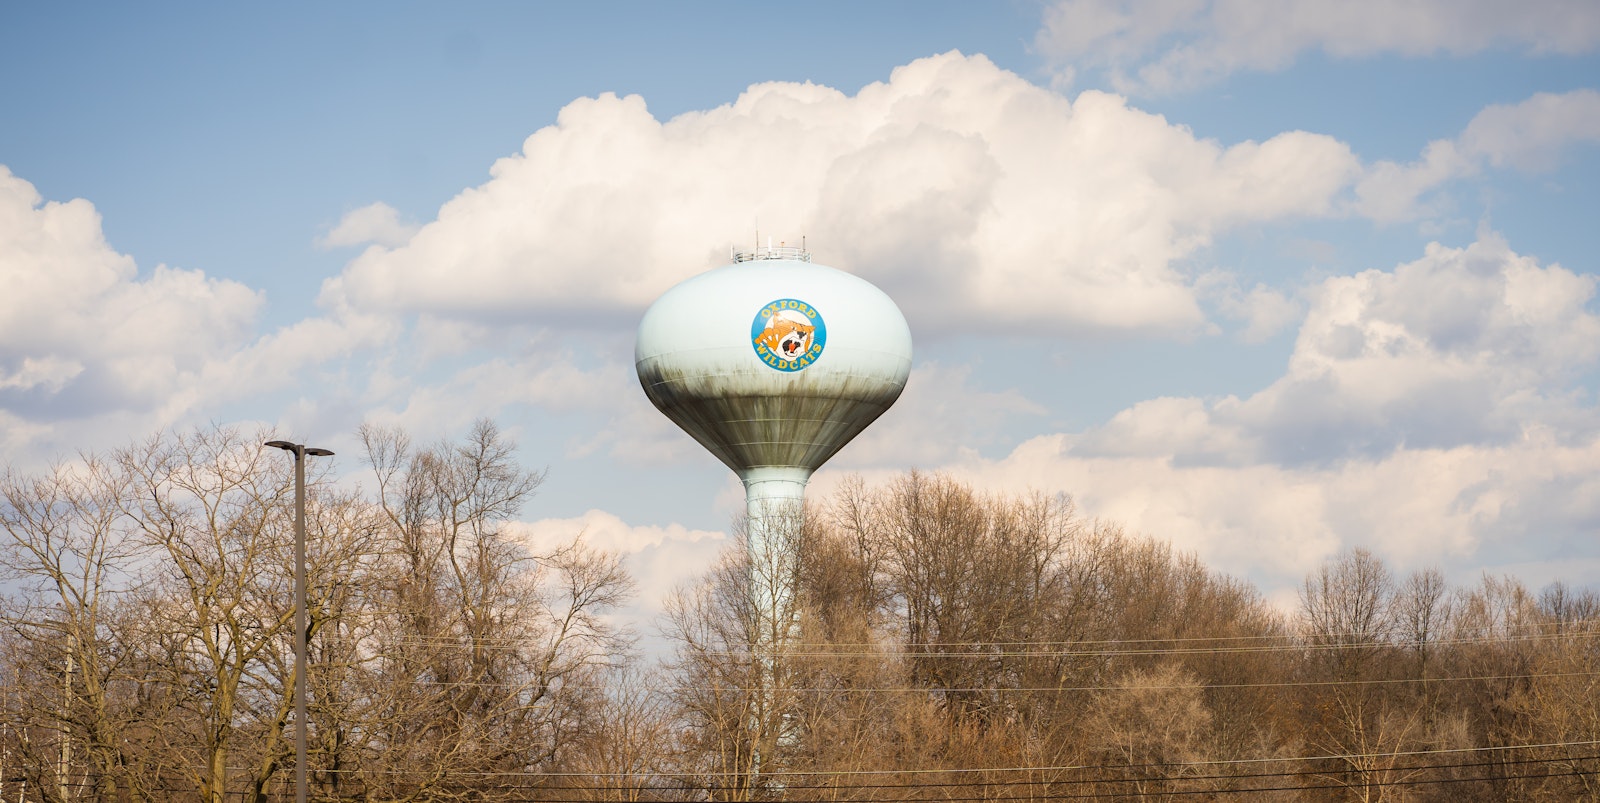 A water tower with the Oxford High School logo is pictured across the street from the high school. The community of 22,000 is at the edge of suburban sprawl, with farm country to the north and suburban neighborhoods to its south.